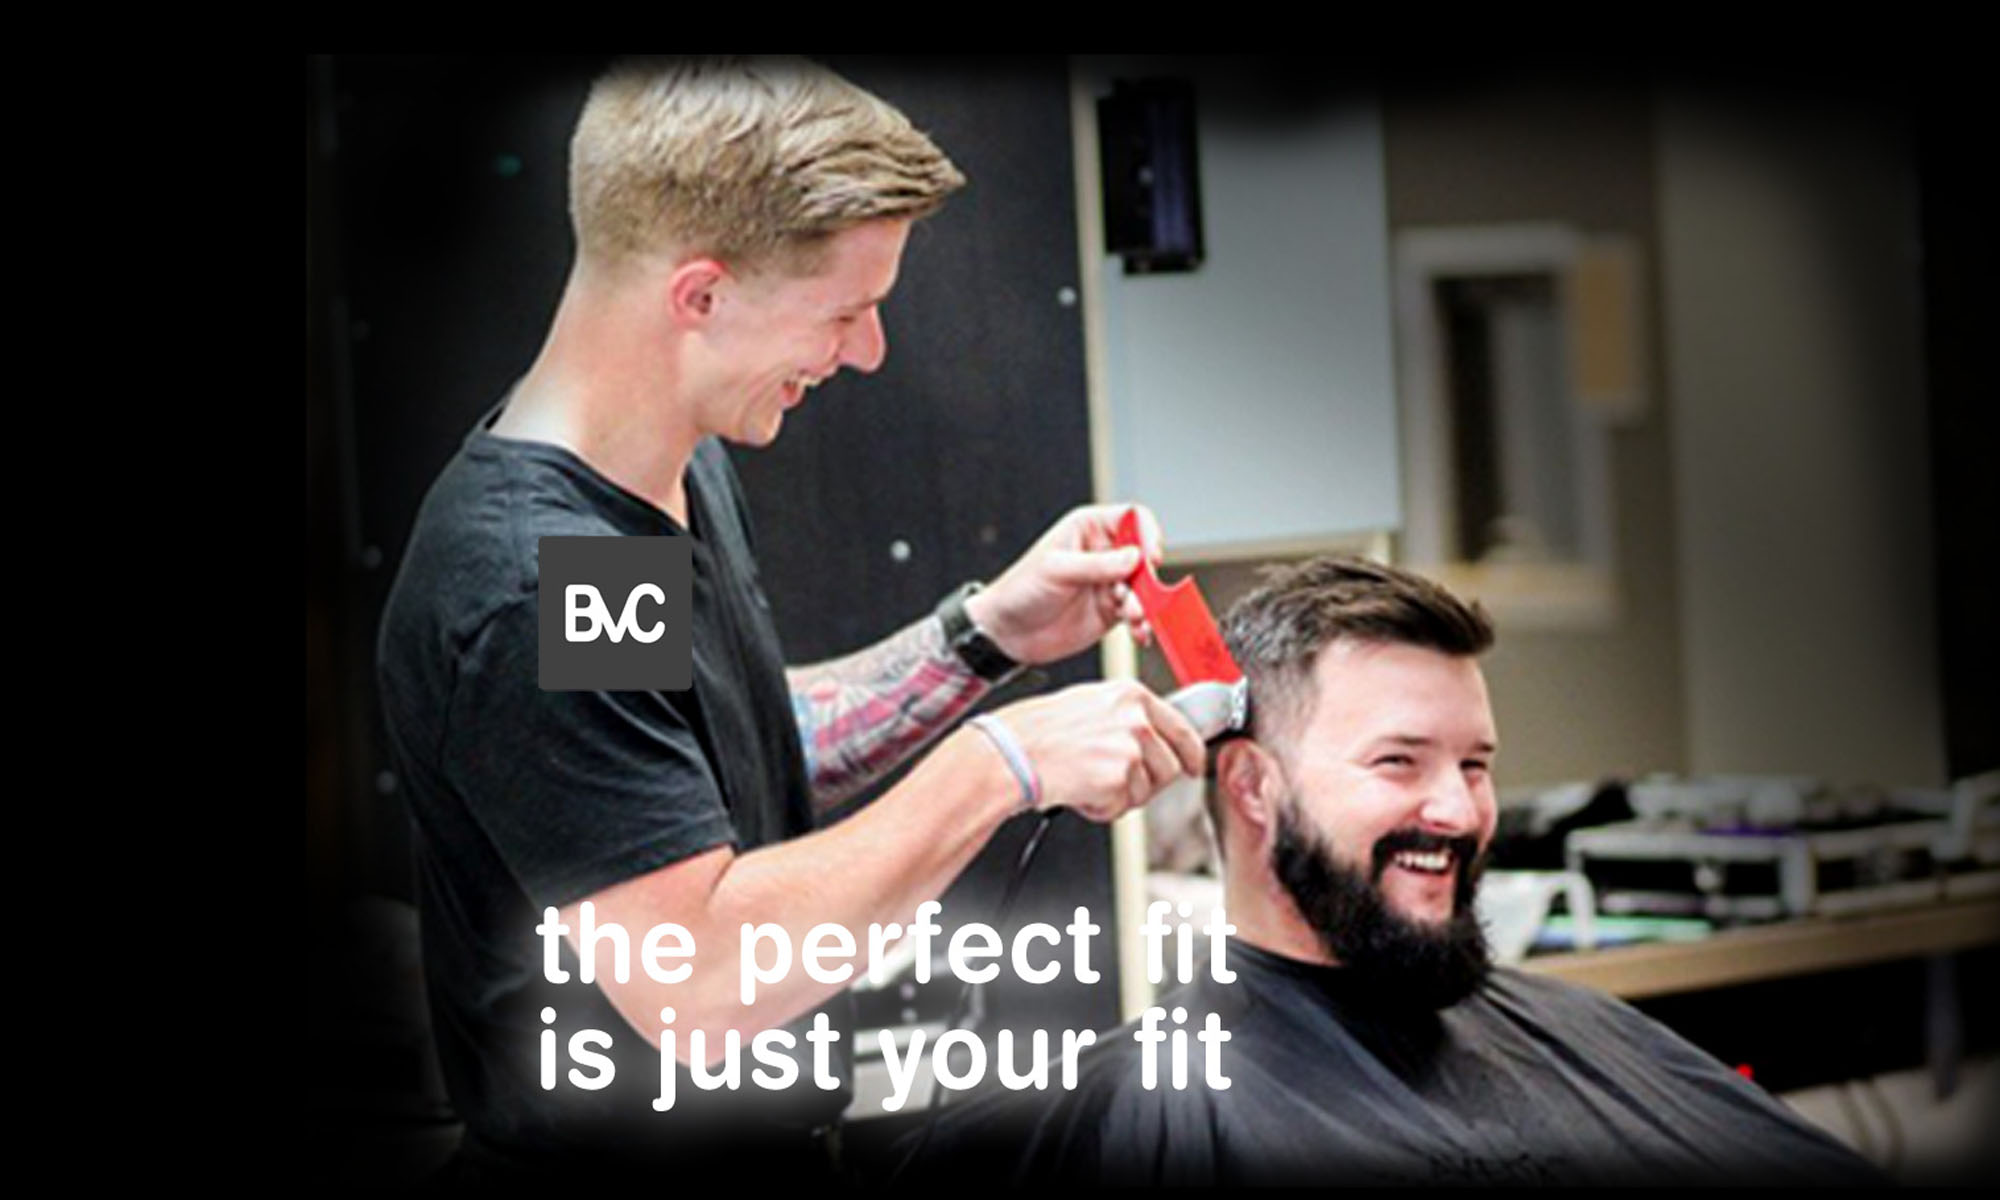 BVC marketing communications, hairstylist, the perfect fit is just your fit